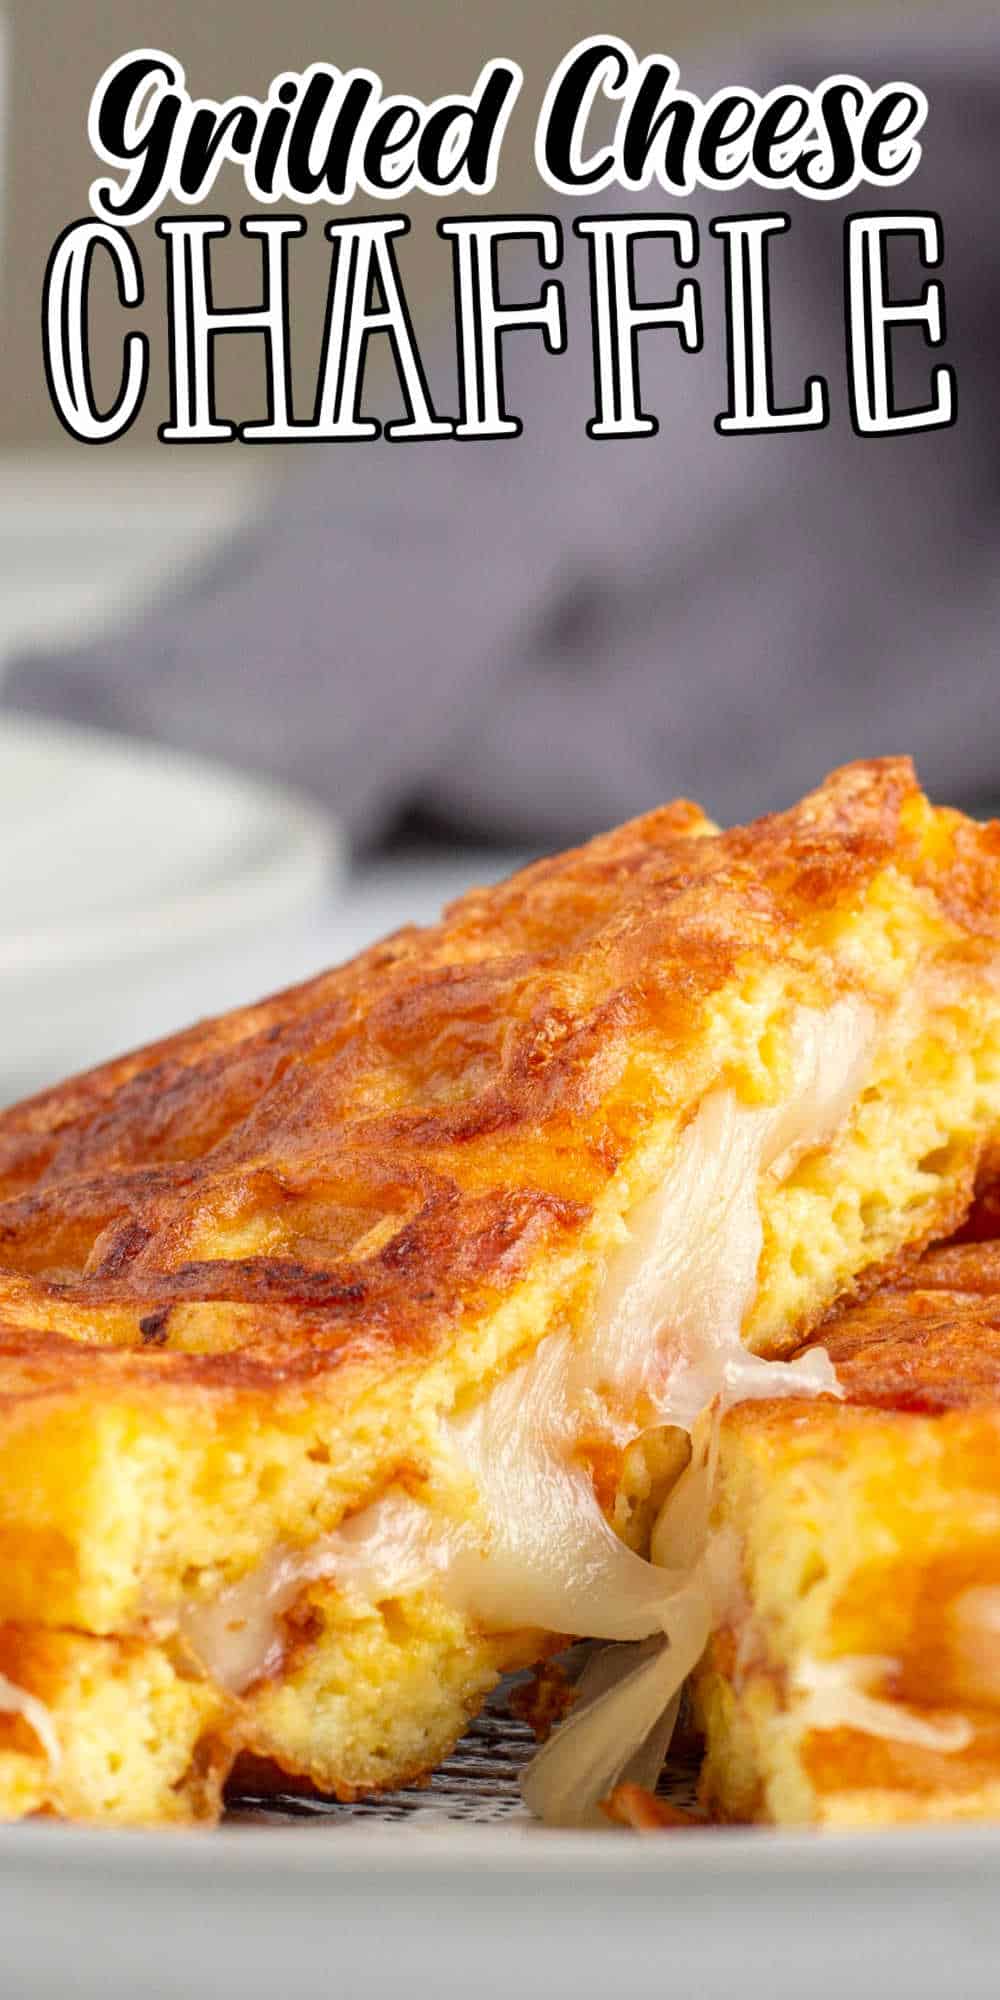 Keto Grilled Cheese Chaffle Recipe • Low Carb Nomad